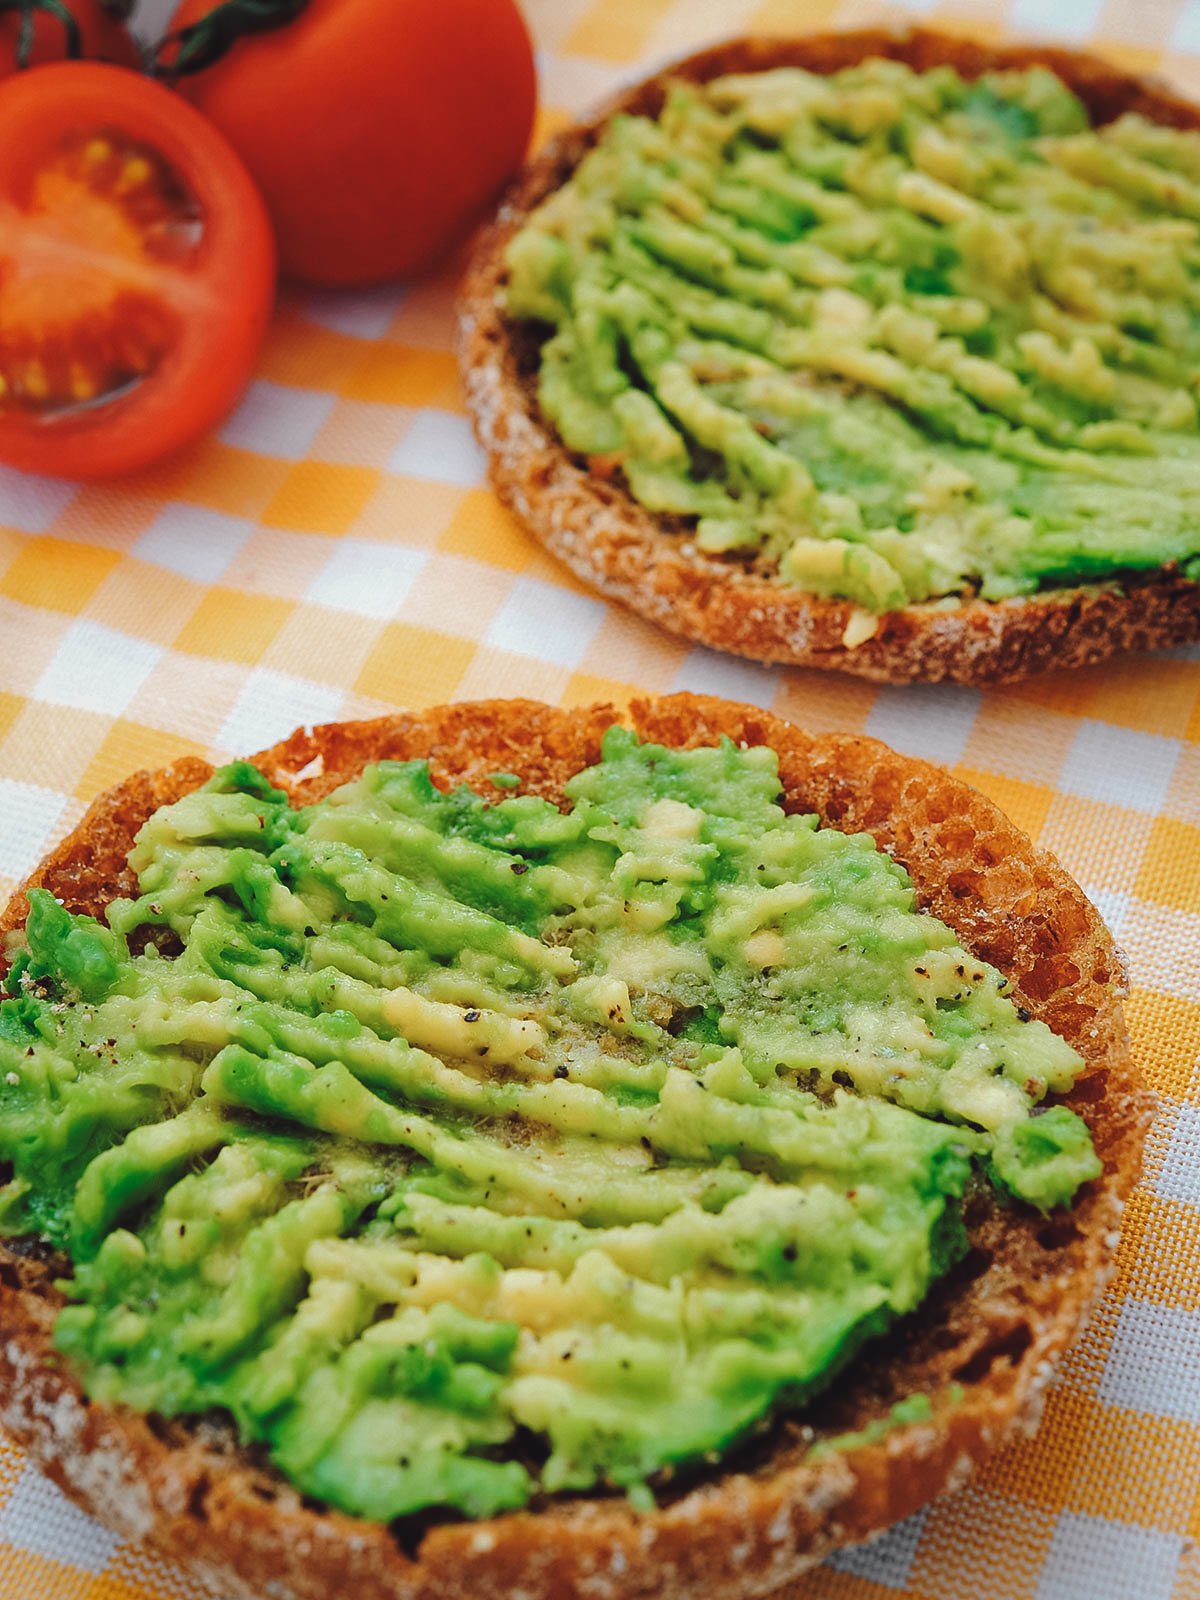 Pan con palta, a Chilean comfort food made with mashed avocado and bread